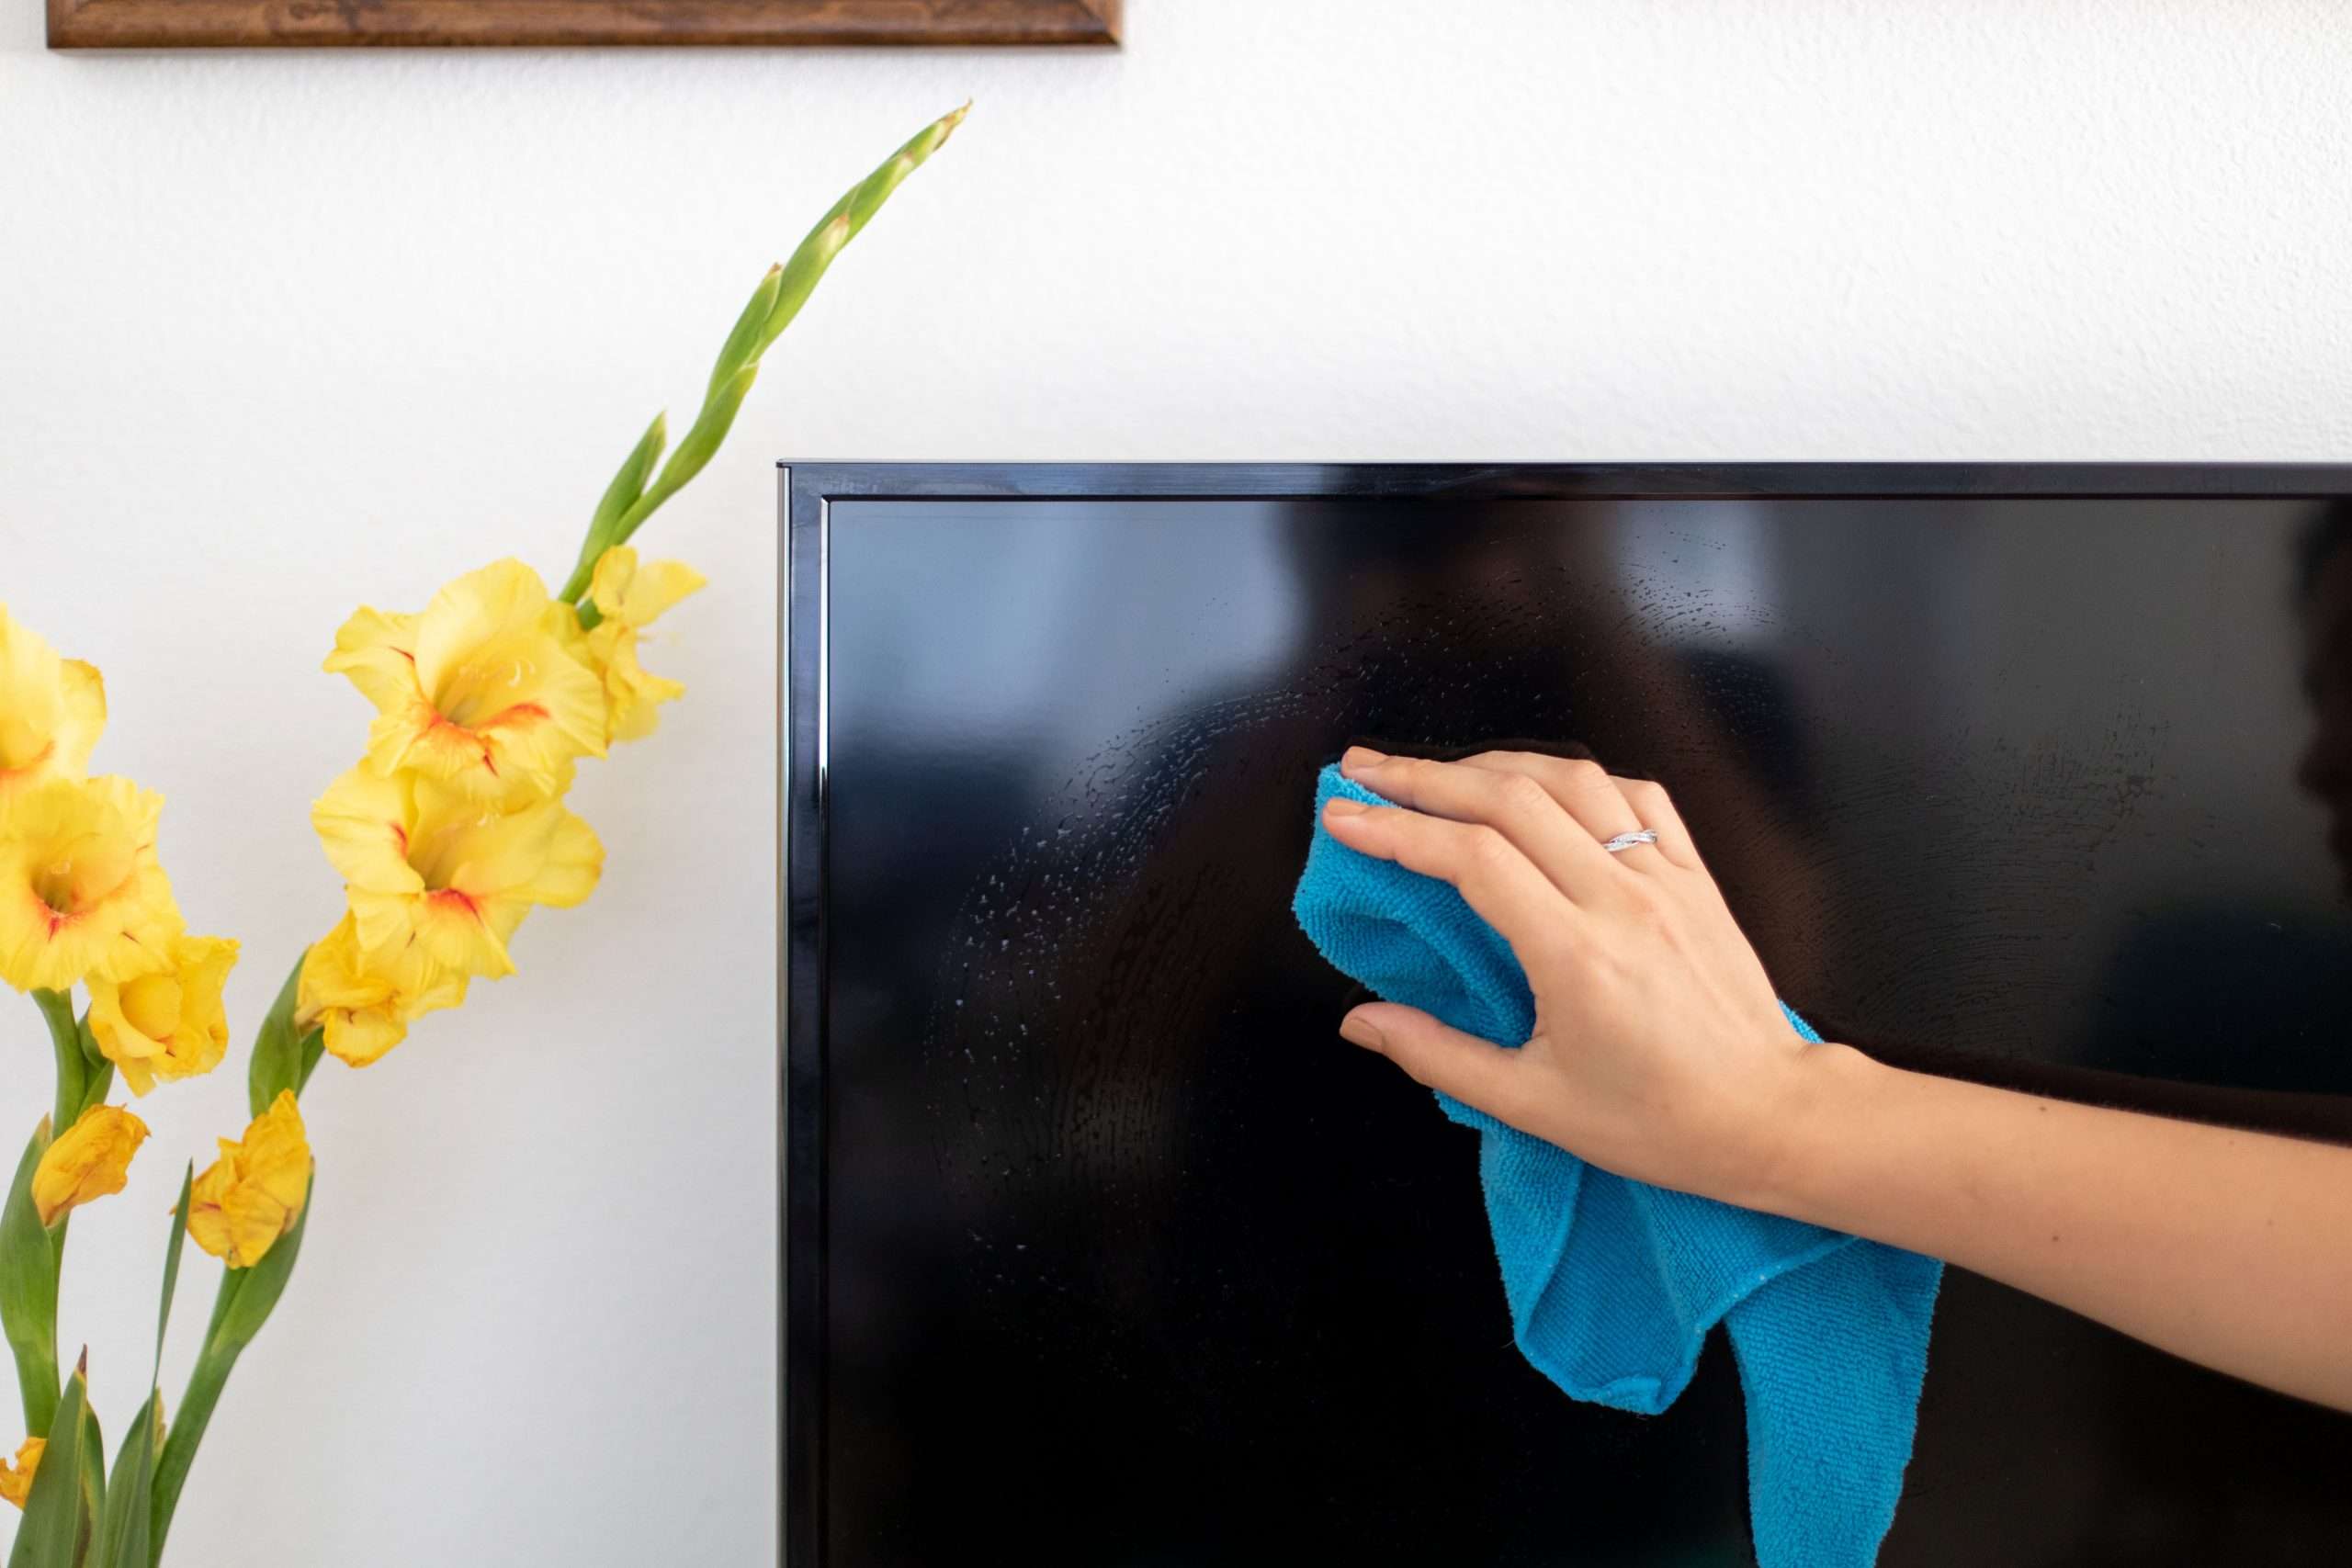 How To Clean a TV Screen Using Things You Already Have